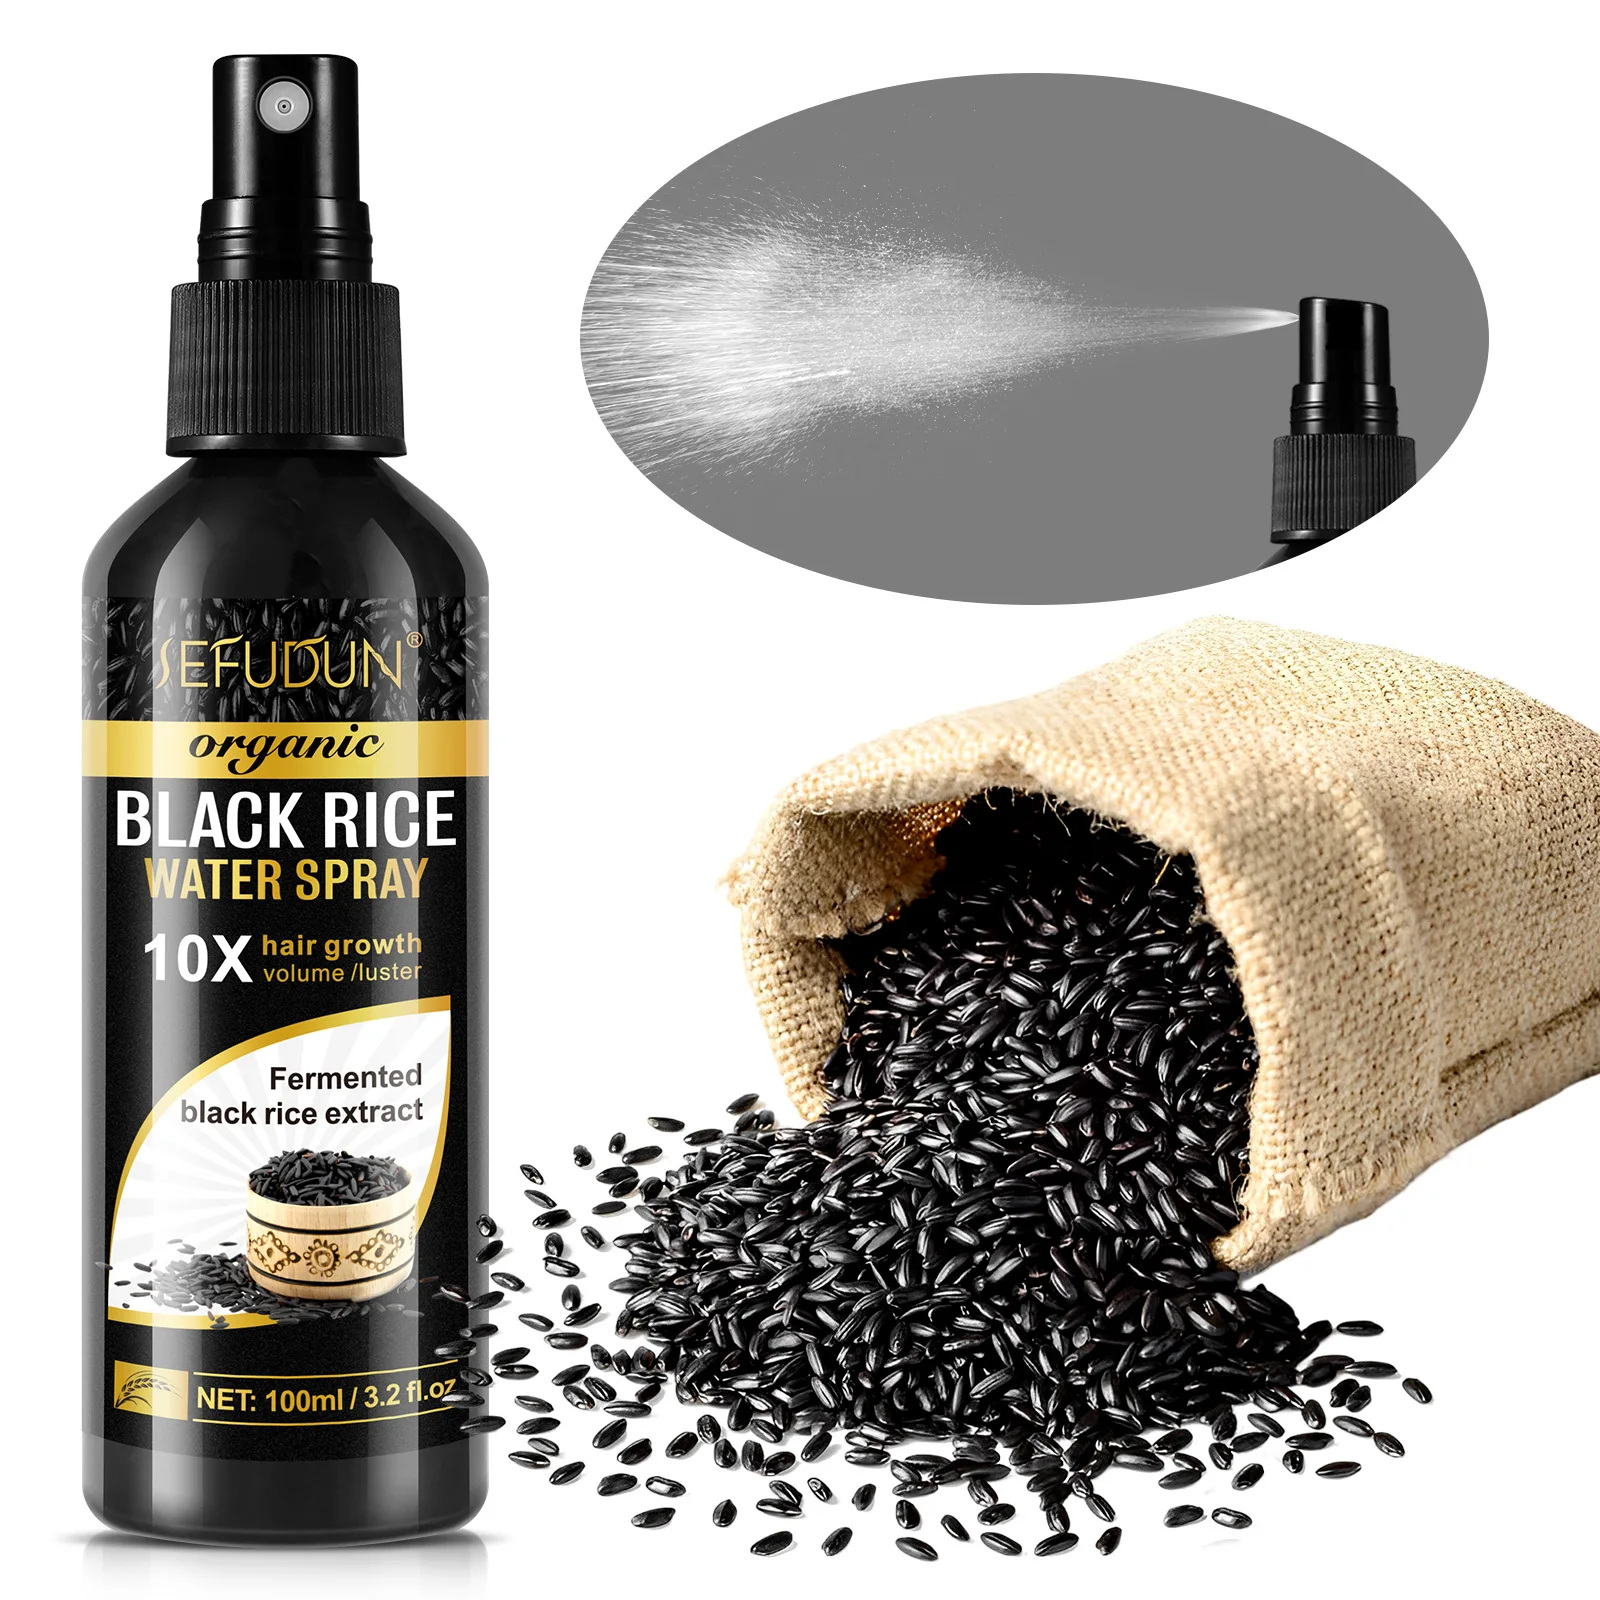 

OEM Private Label 100Ml Hair Loss Treatment Biotin Black Rice Water Hair Growth Serum Spray For Hair Growth And Strengthen